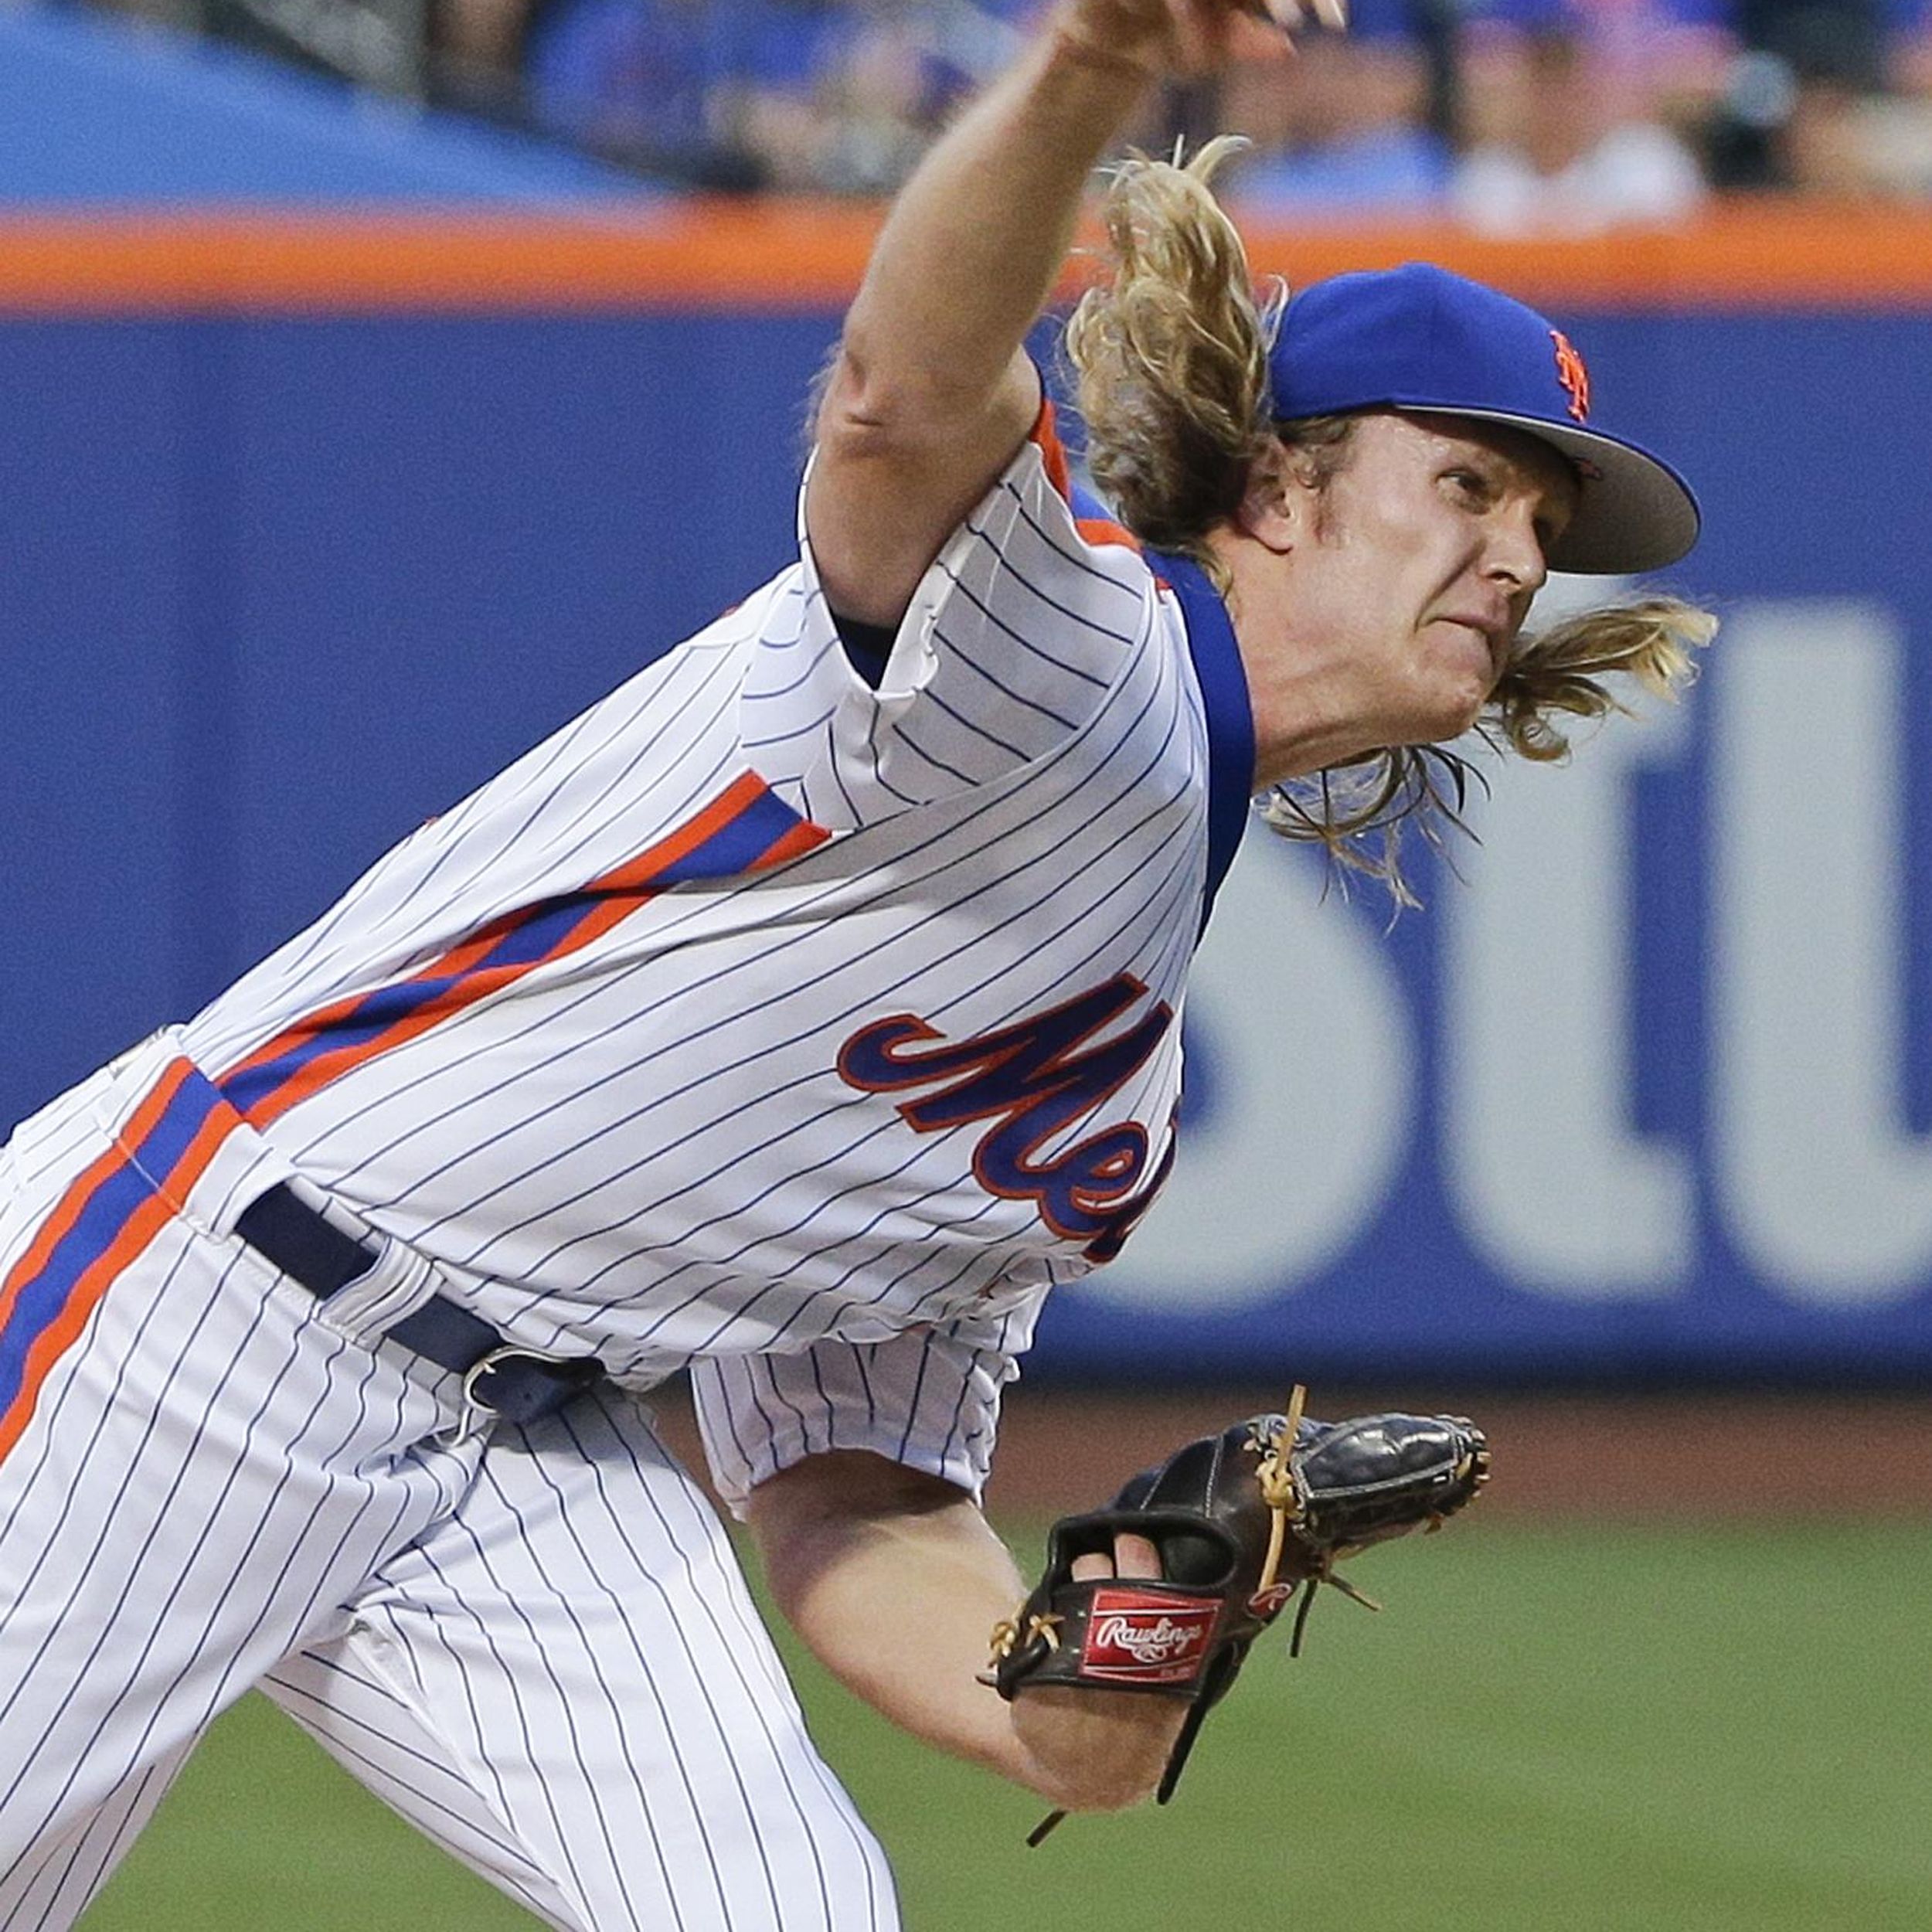 Noah Syndergaard talks about offseason workout changes after